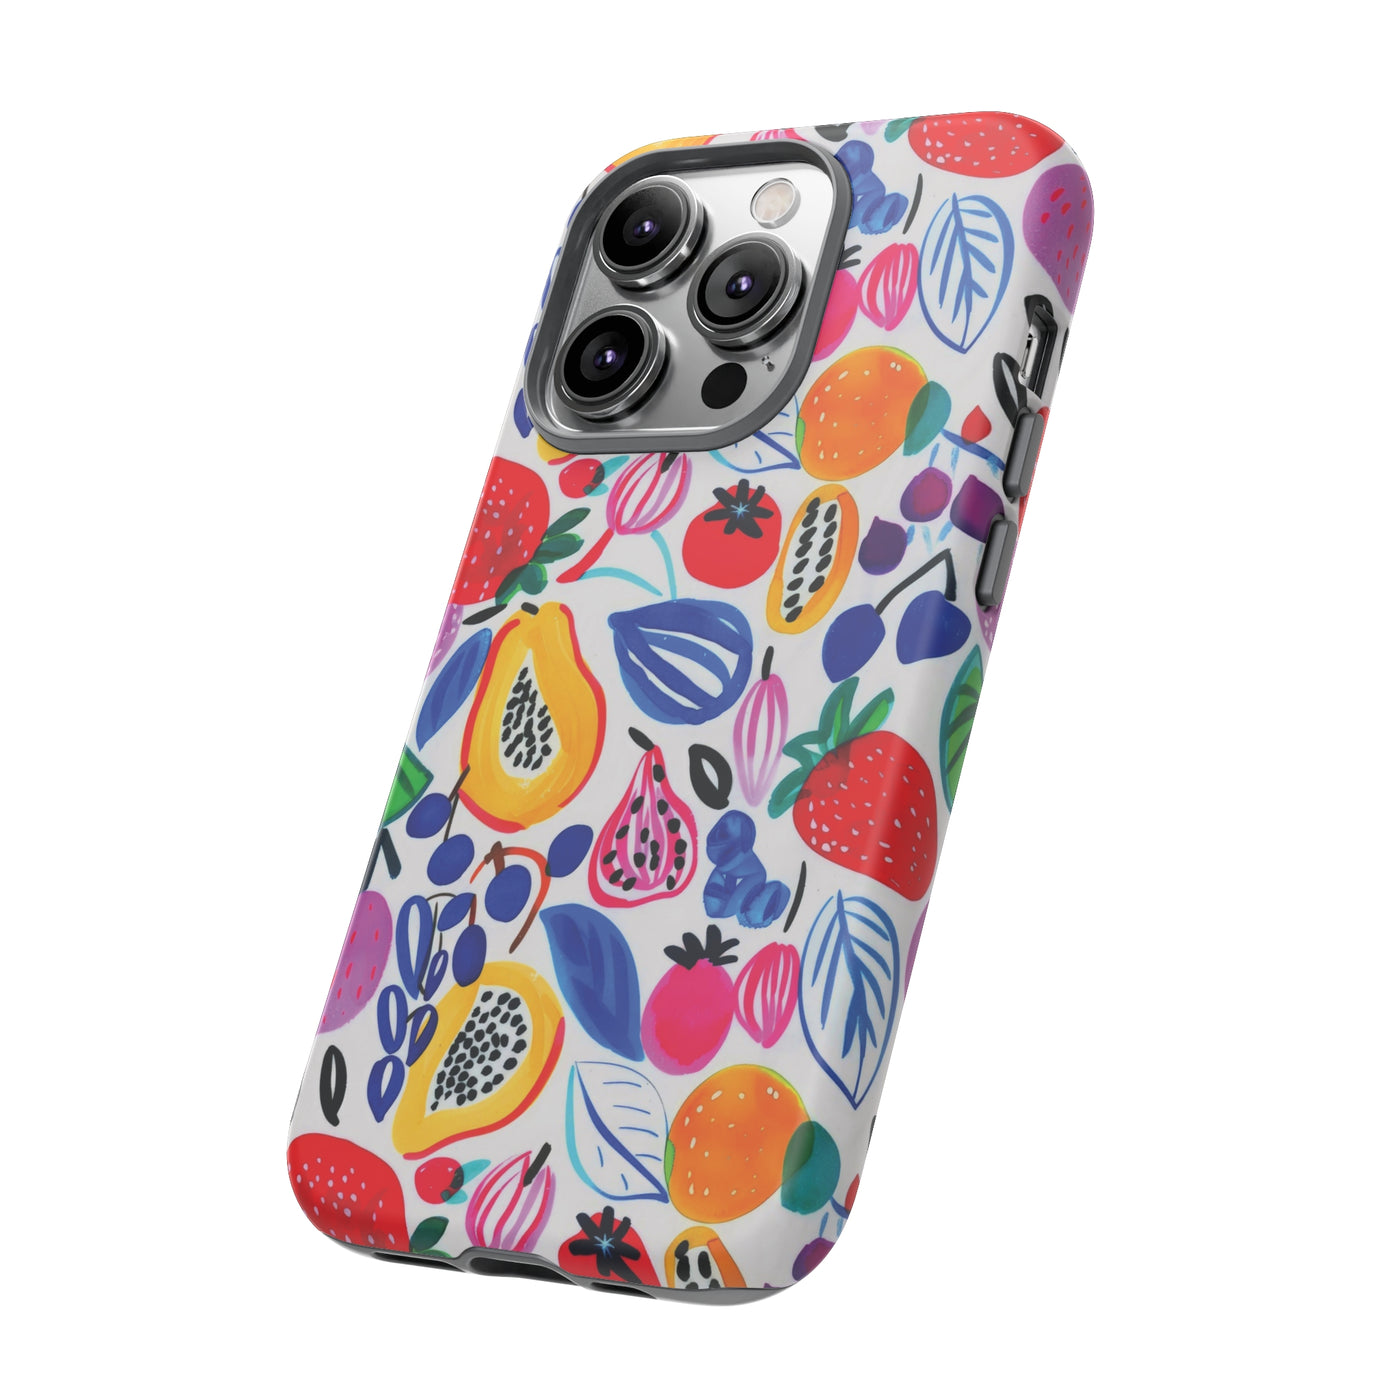 Cute IPhone Case | Summer Fruits Cocktail, iPhone 15 Case | iPhone 15 Pro Case, Iphone 14 Case, Iphone 14 Pro Max Case, Protective Iphone Case